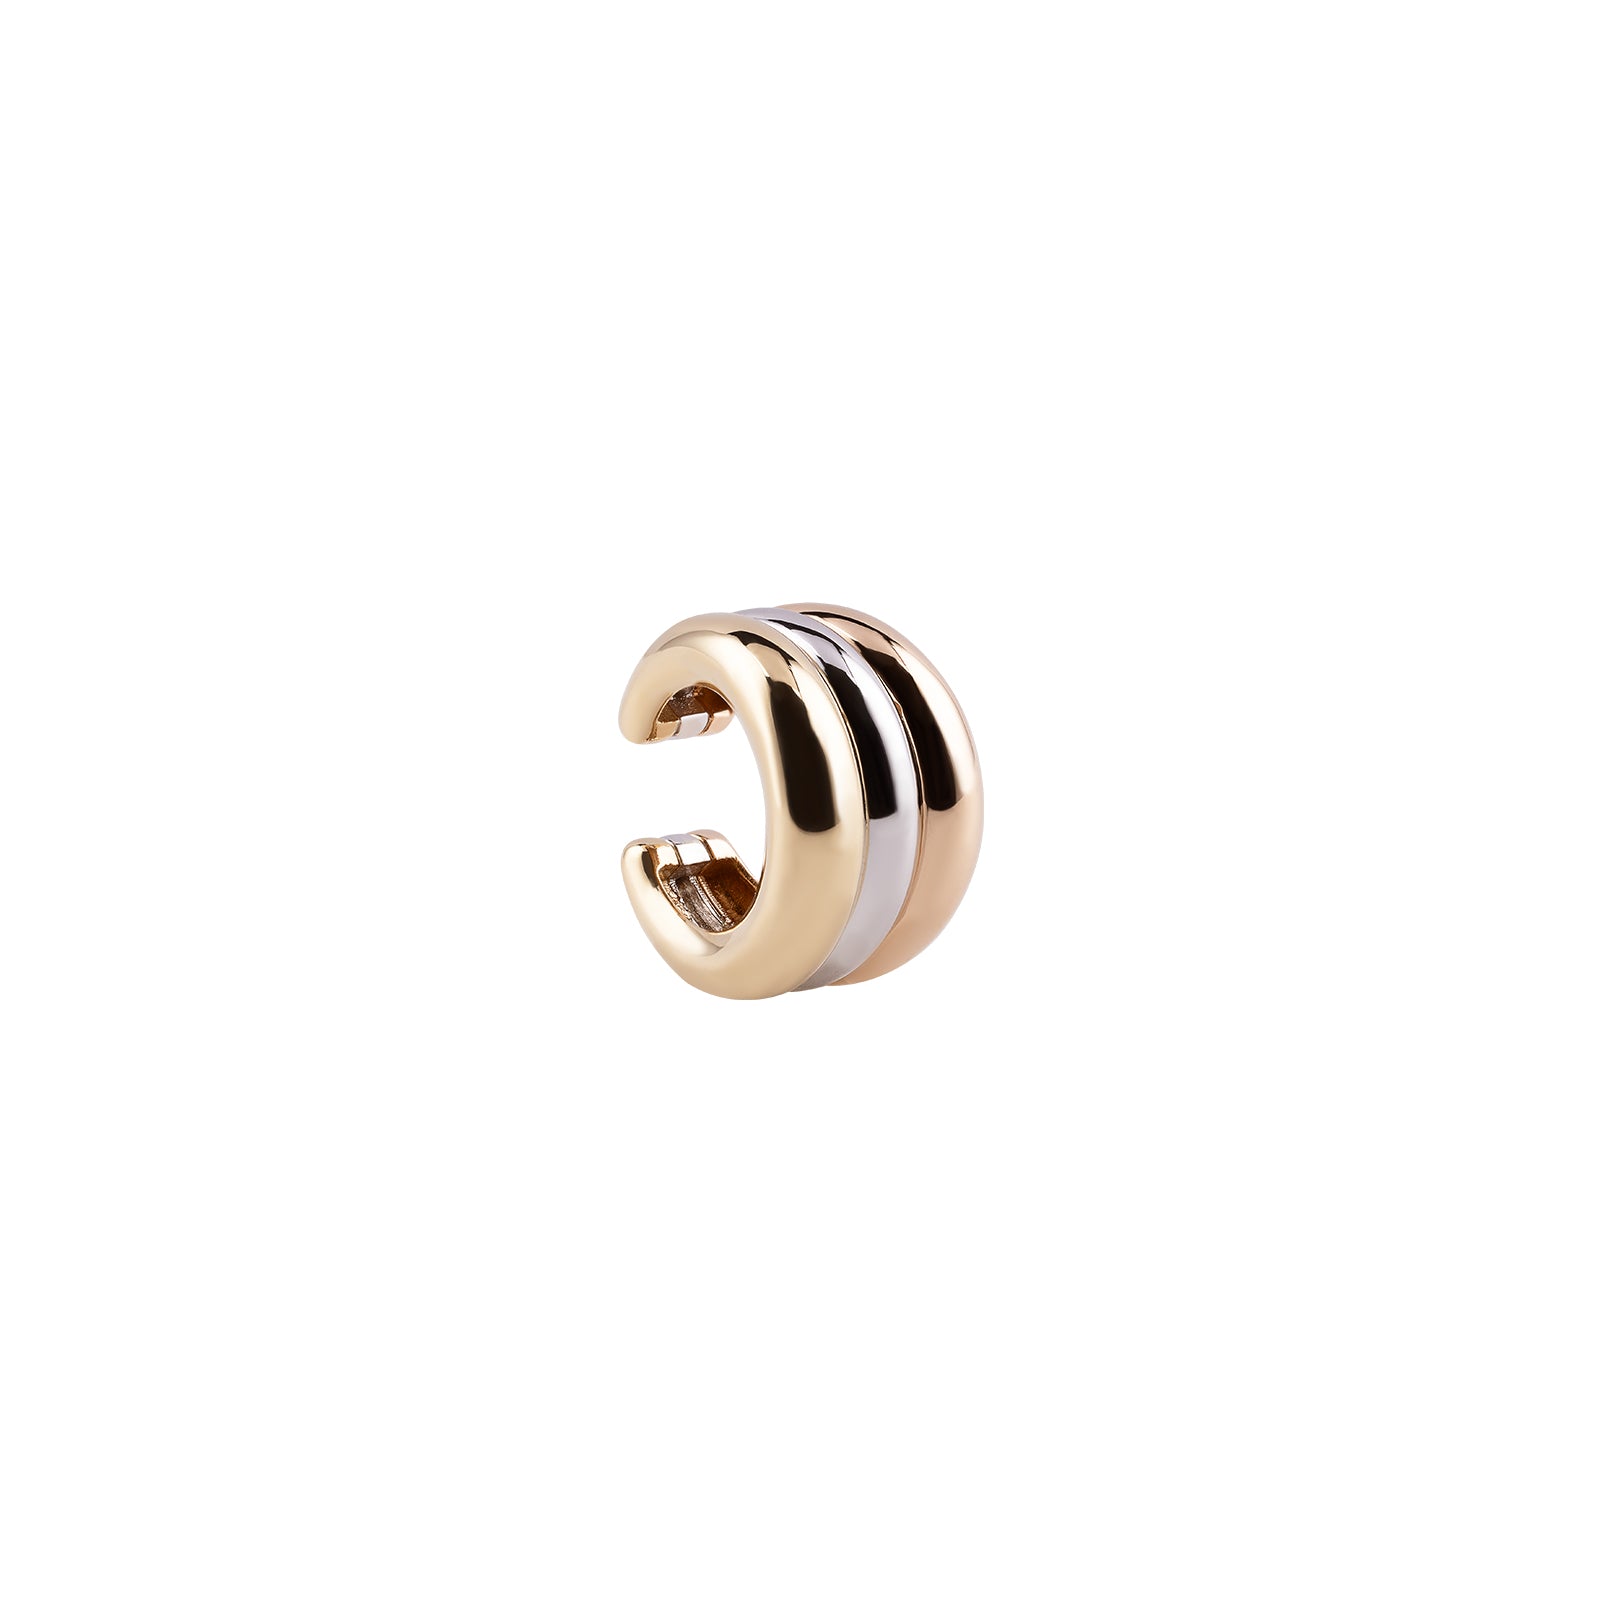 Nomad Cuff Earring Roslow, White and Yellow Gold